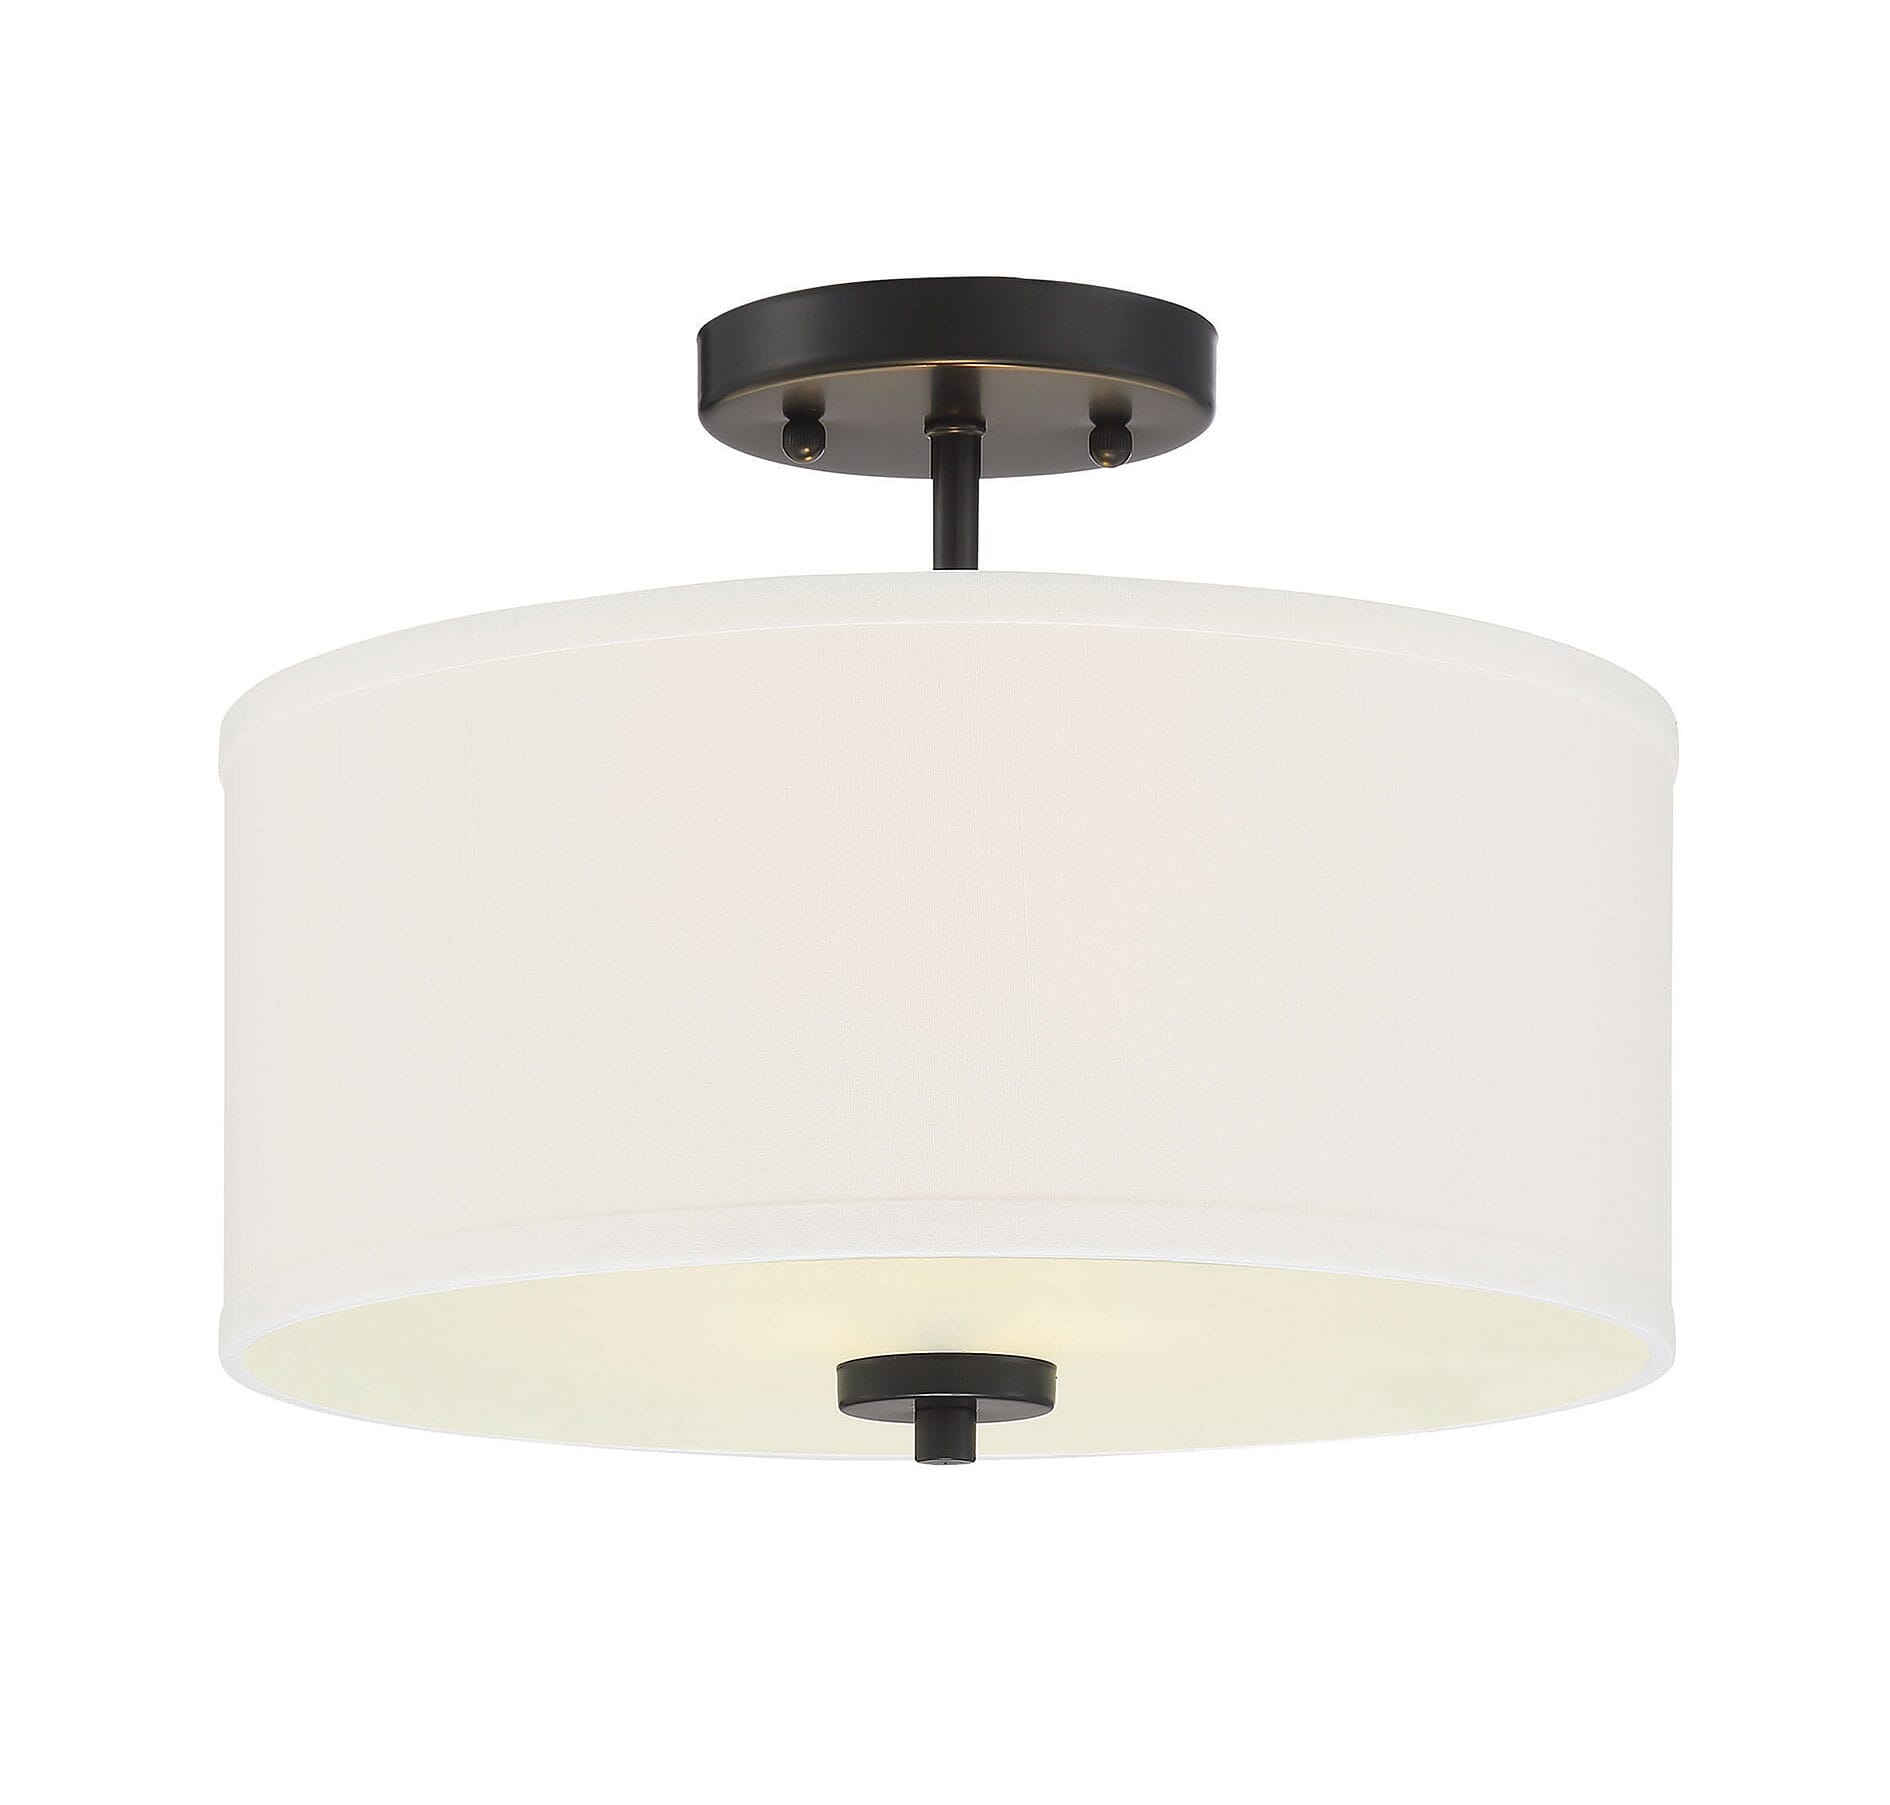 Trade Winds Lighting TW80013-MBK